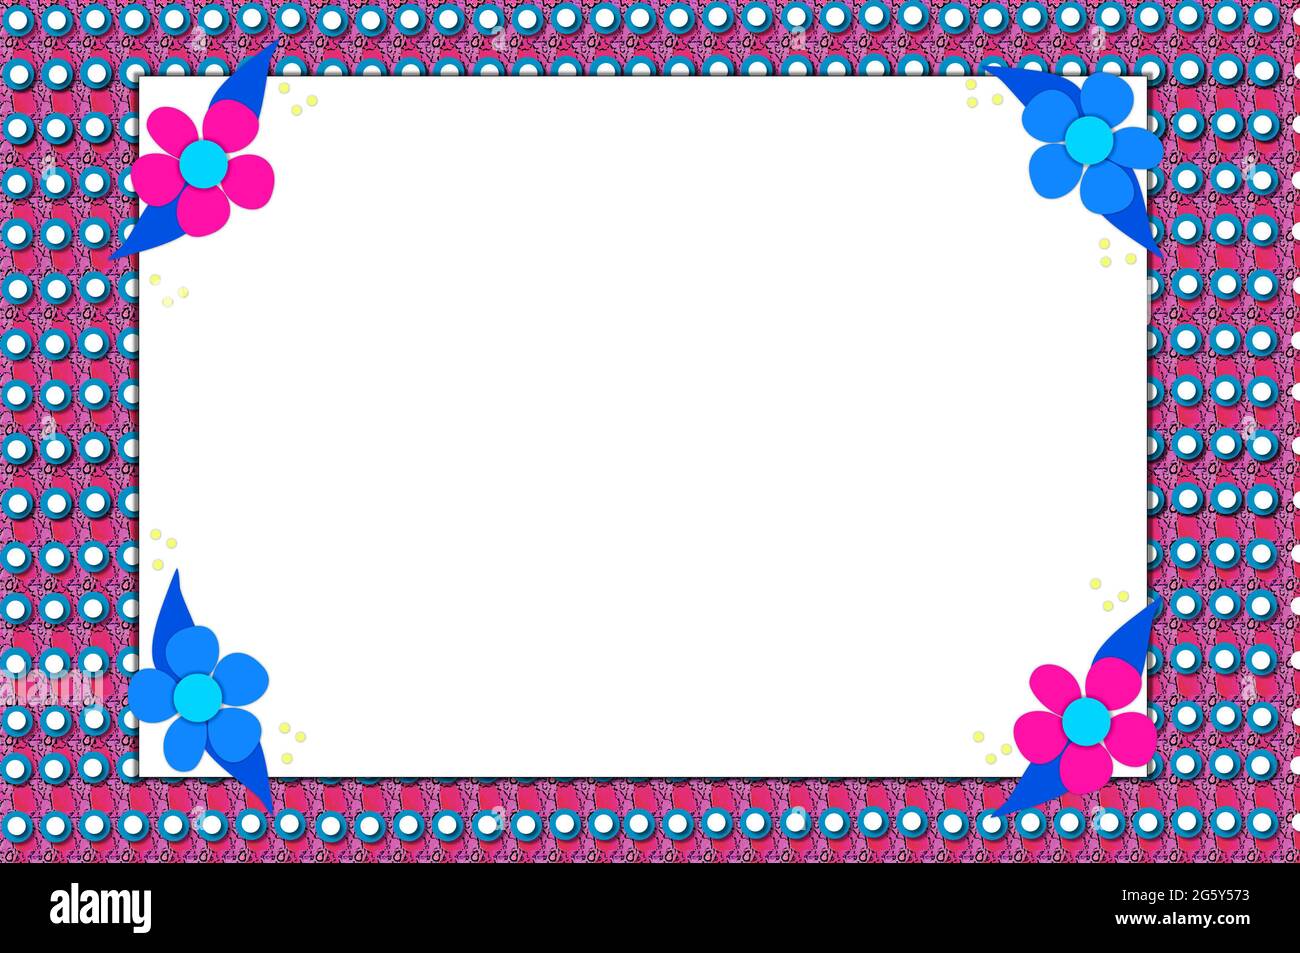 Scrapbooking background has pink print layer, topped by rows of blue and white polka dots.  Blank, white rectangle, is secured in each corner by large Stock Photo